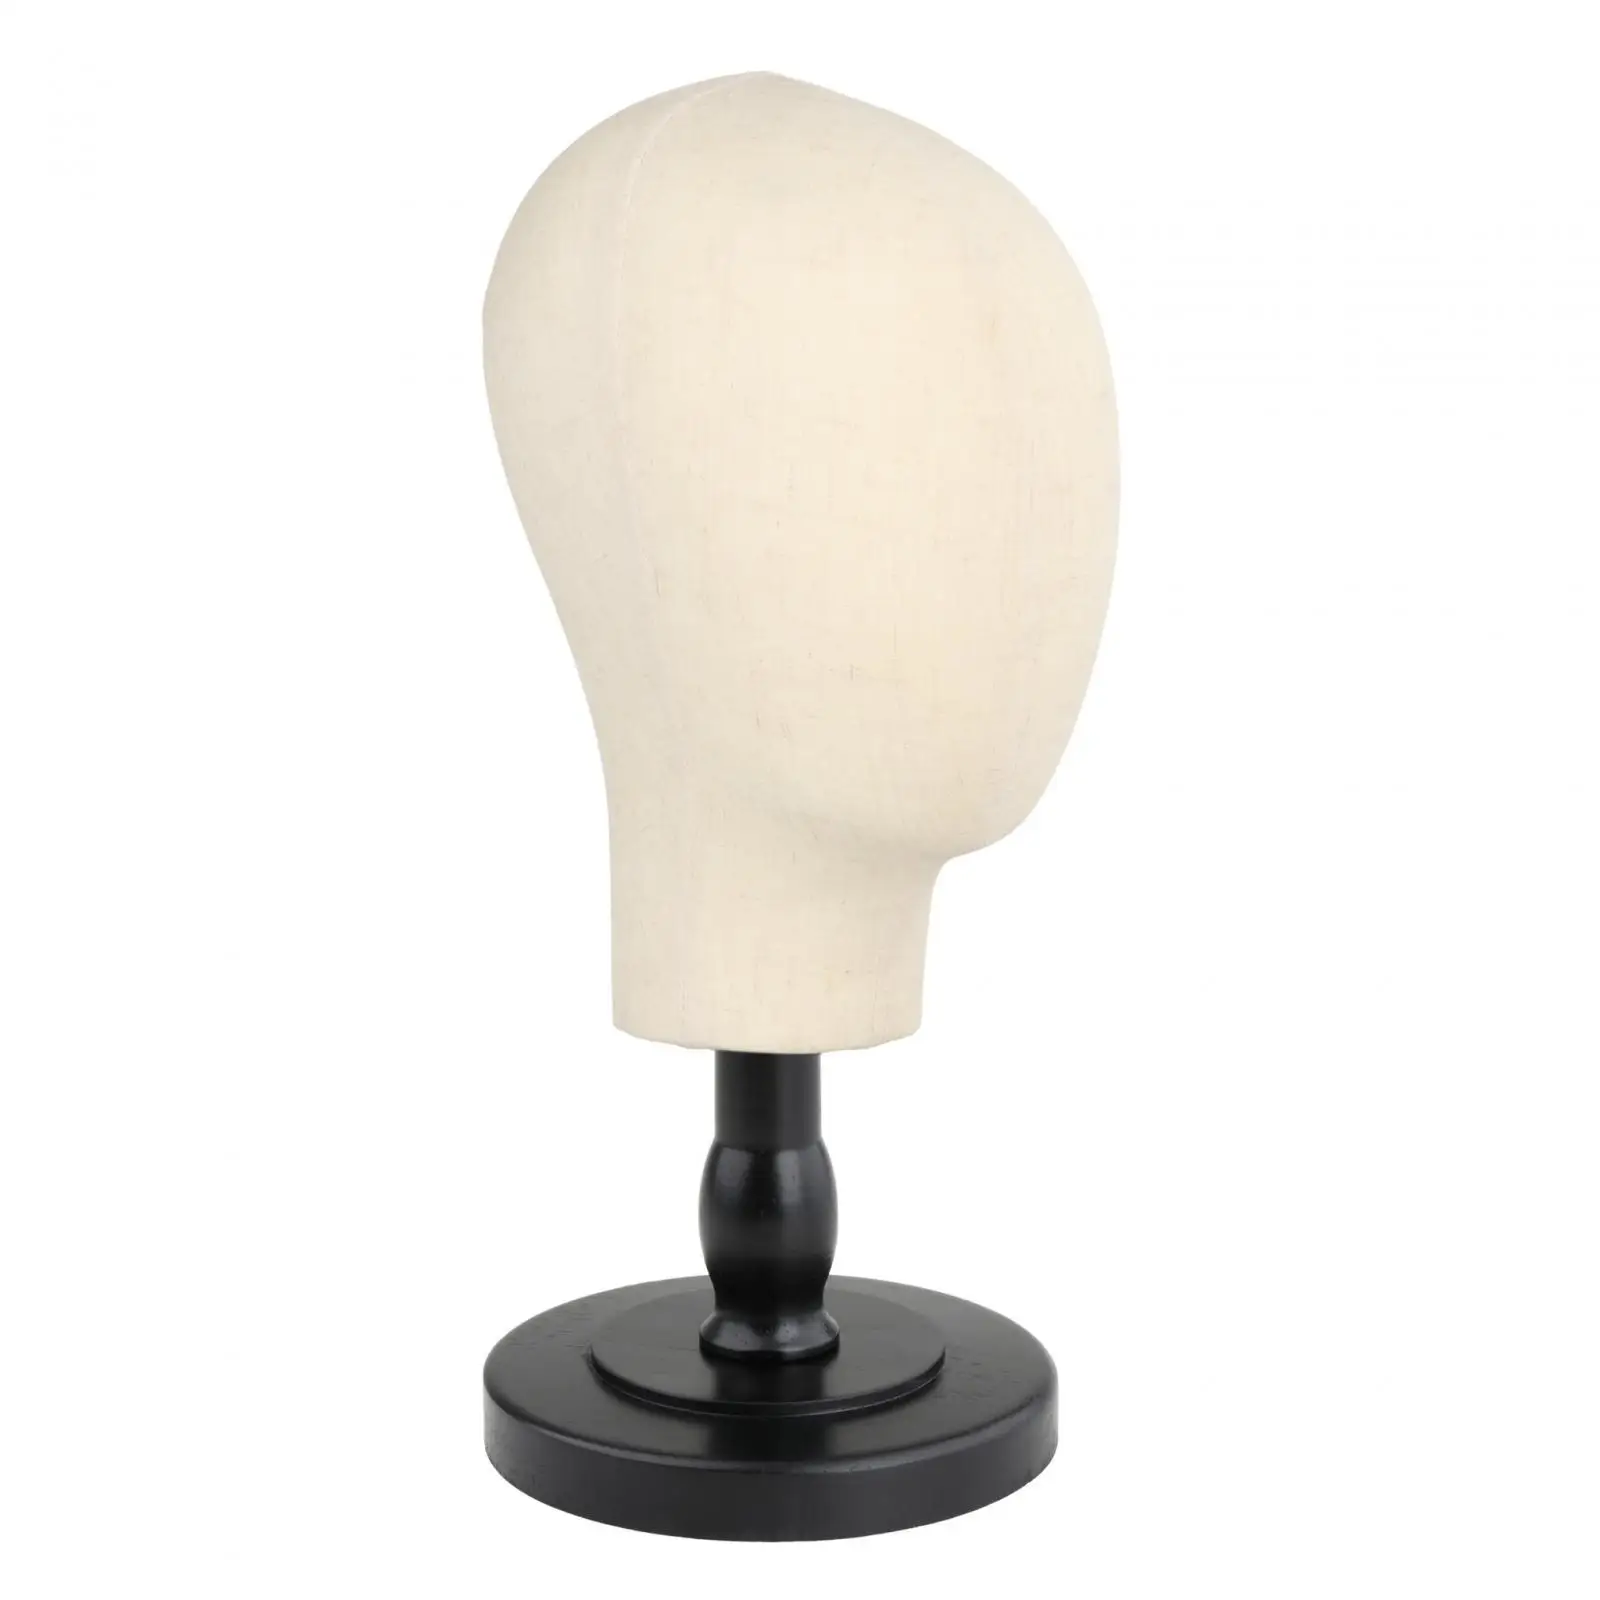 Adult Mannequin Head Freestanding Professional Sturdy Durable Easy to Assemble Hat Display Stand for Salon Props Shopping Malls